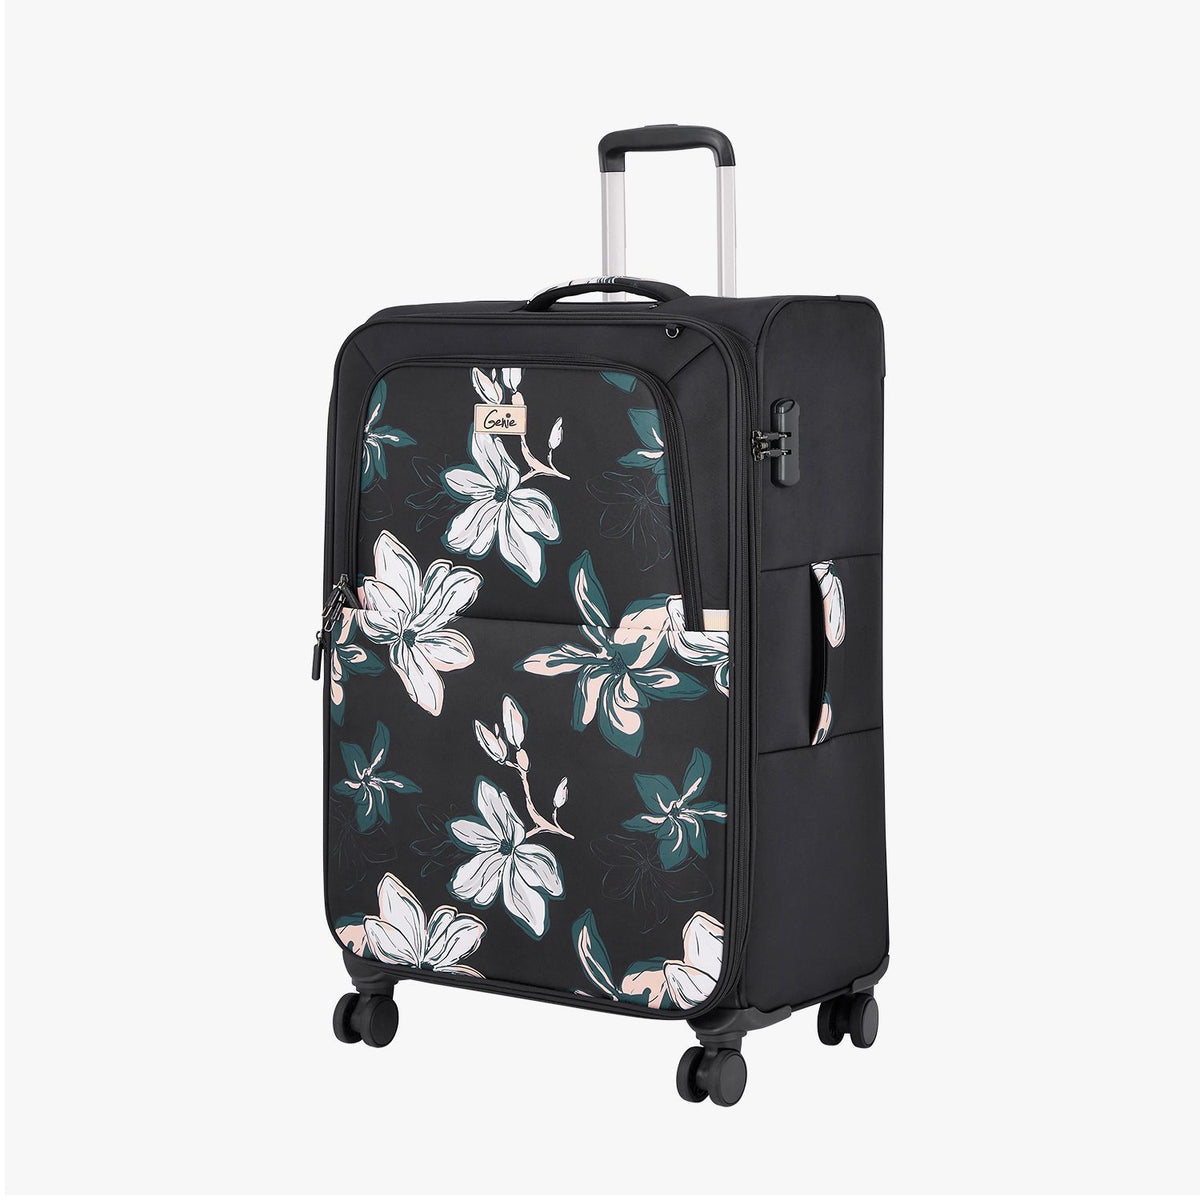 Buy Pollux Large Soft Trolley Suitcase Online | Wildcraft